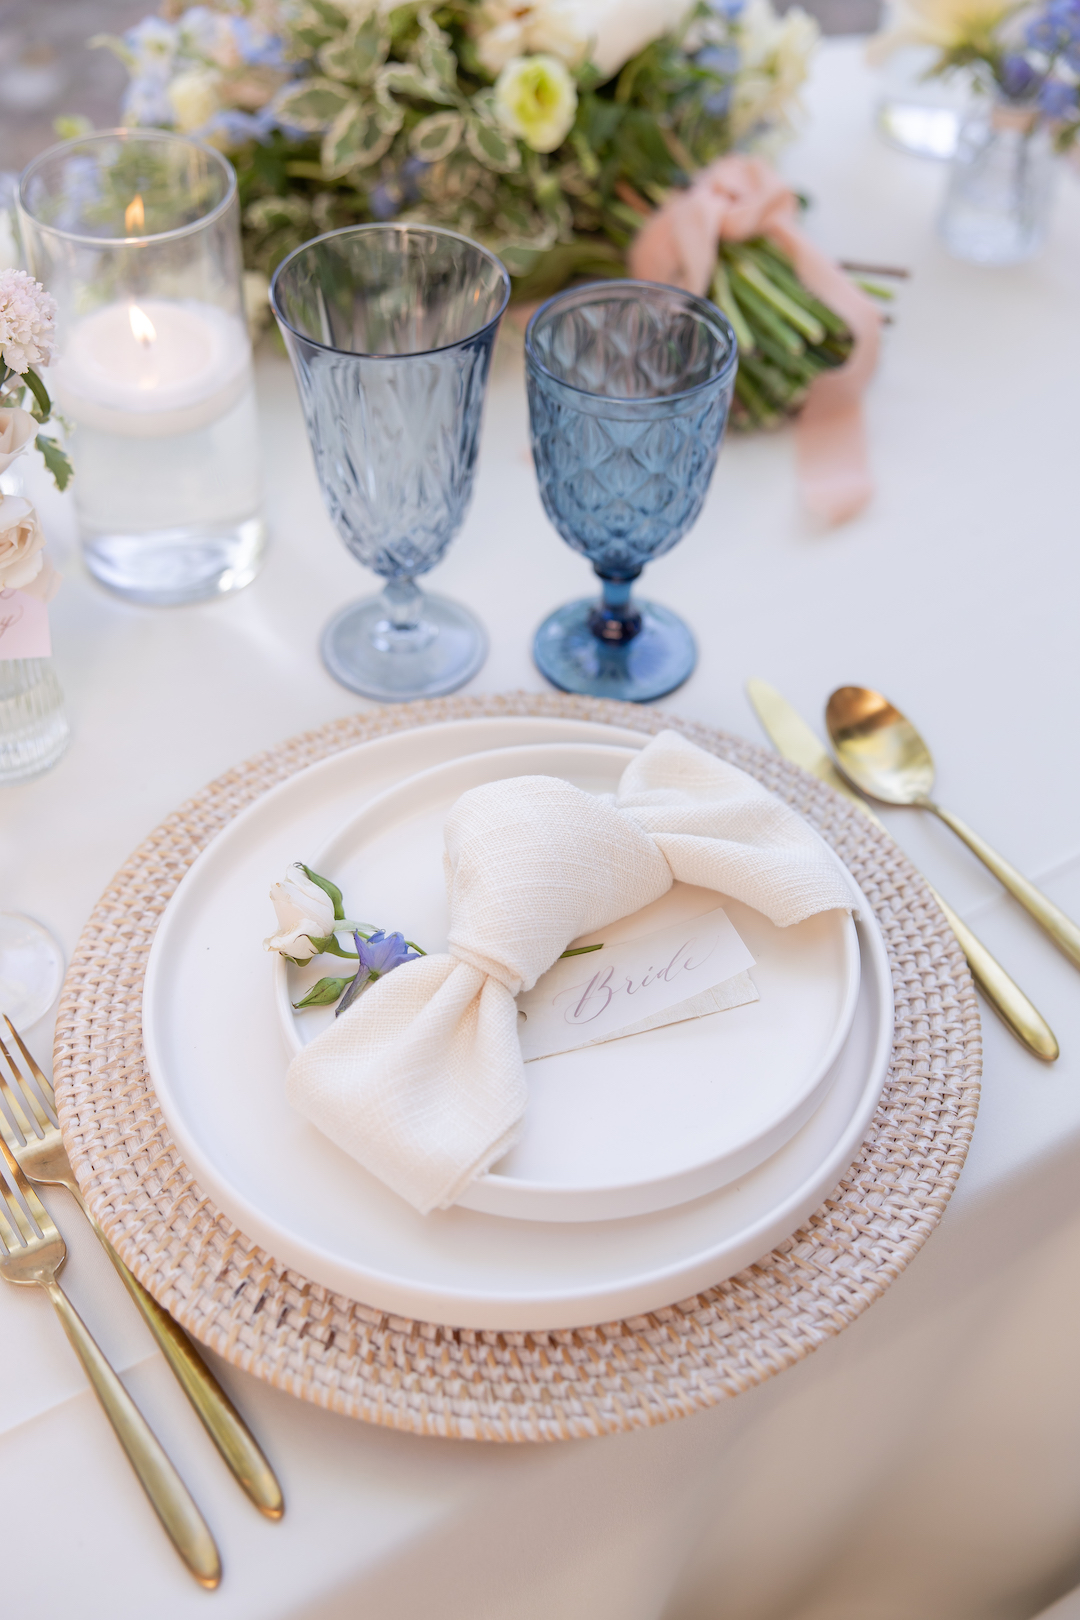 Wedding place setting with ceramic plates, wicker chargers, bow-tied linen napkins and gold flatware. 